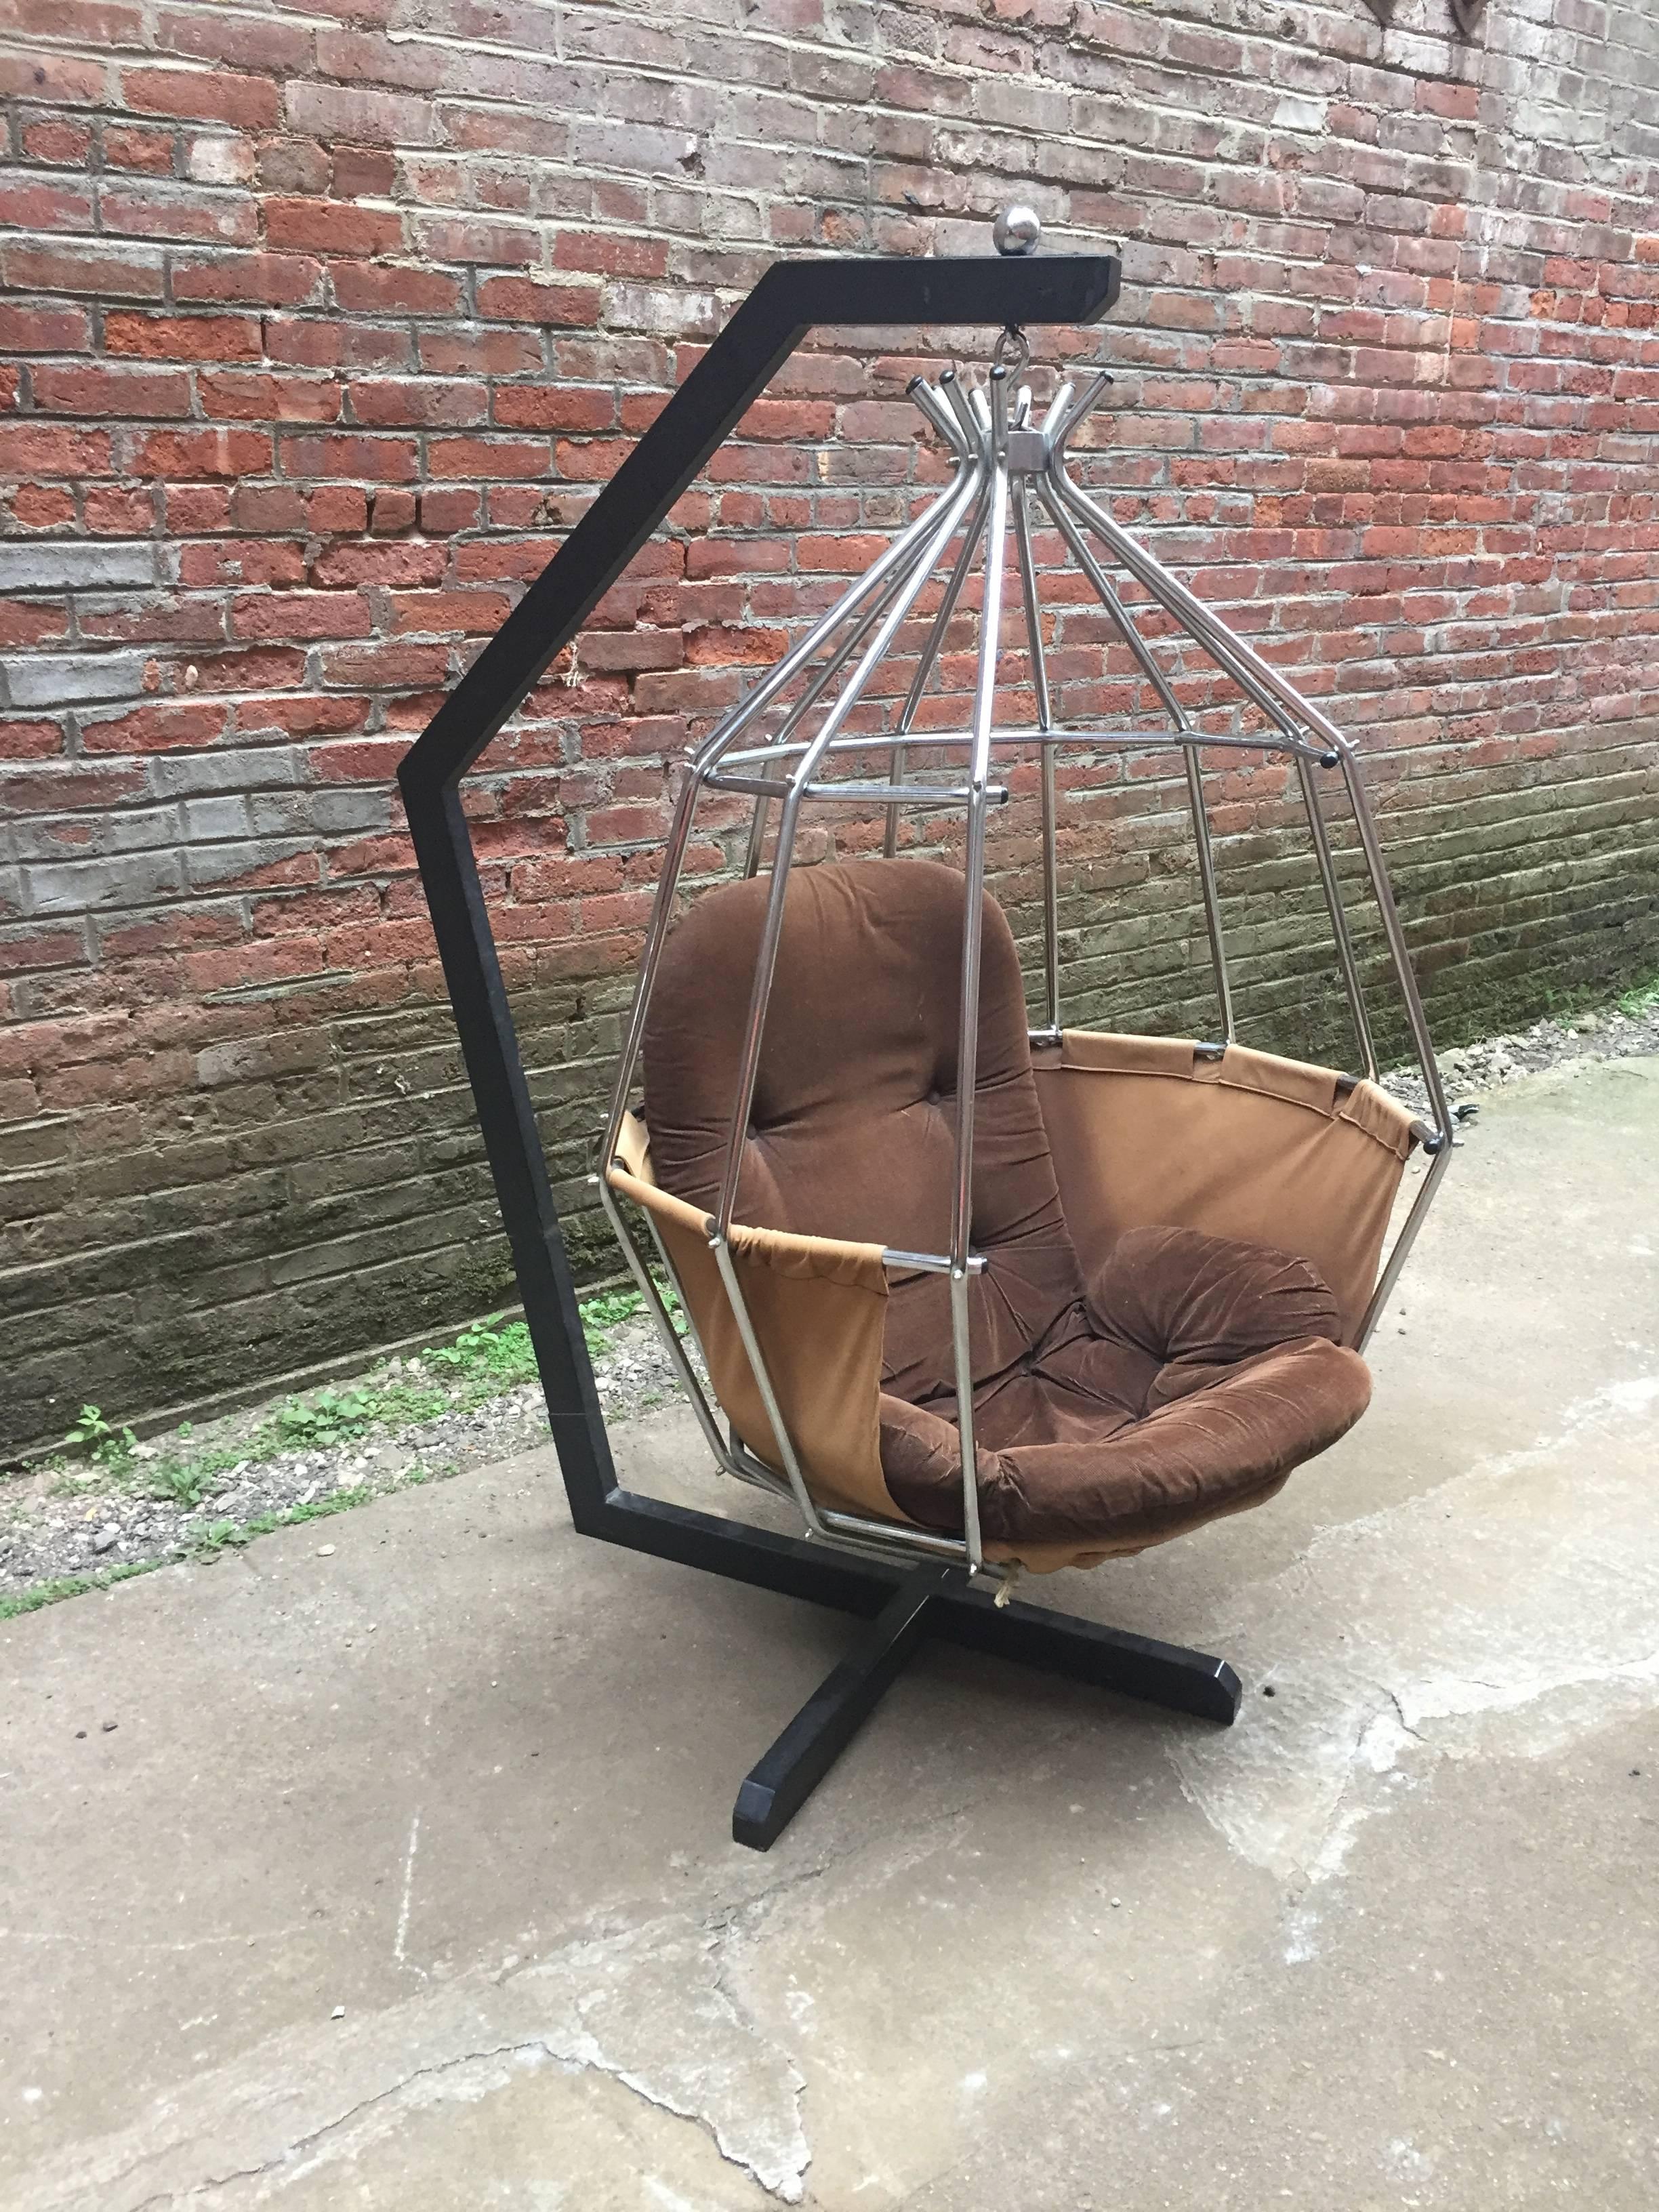 Ib Arberg design, circa 1970-1980. Original brown corduroy and cotton canvas upholstery. Nickel-plated swing cage with a black enamel steel base. Good overall condition with cosmetic wear to the powder coated stand. Scratches and minor